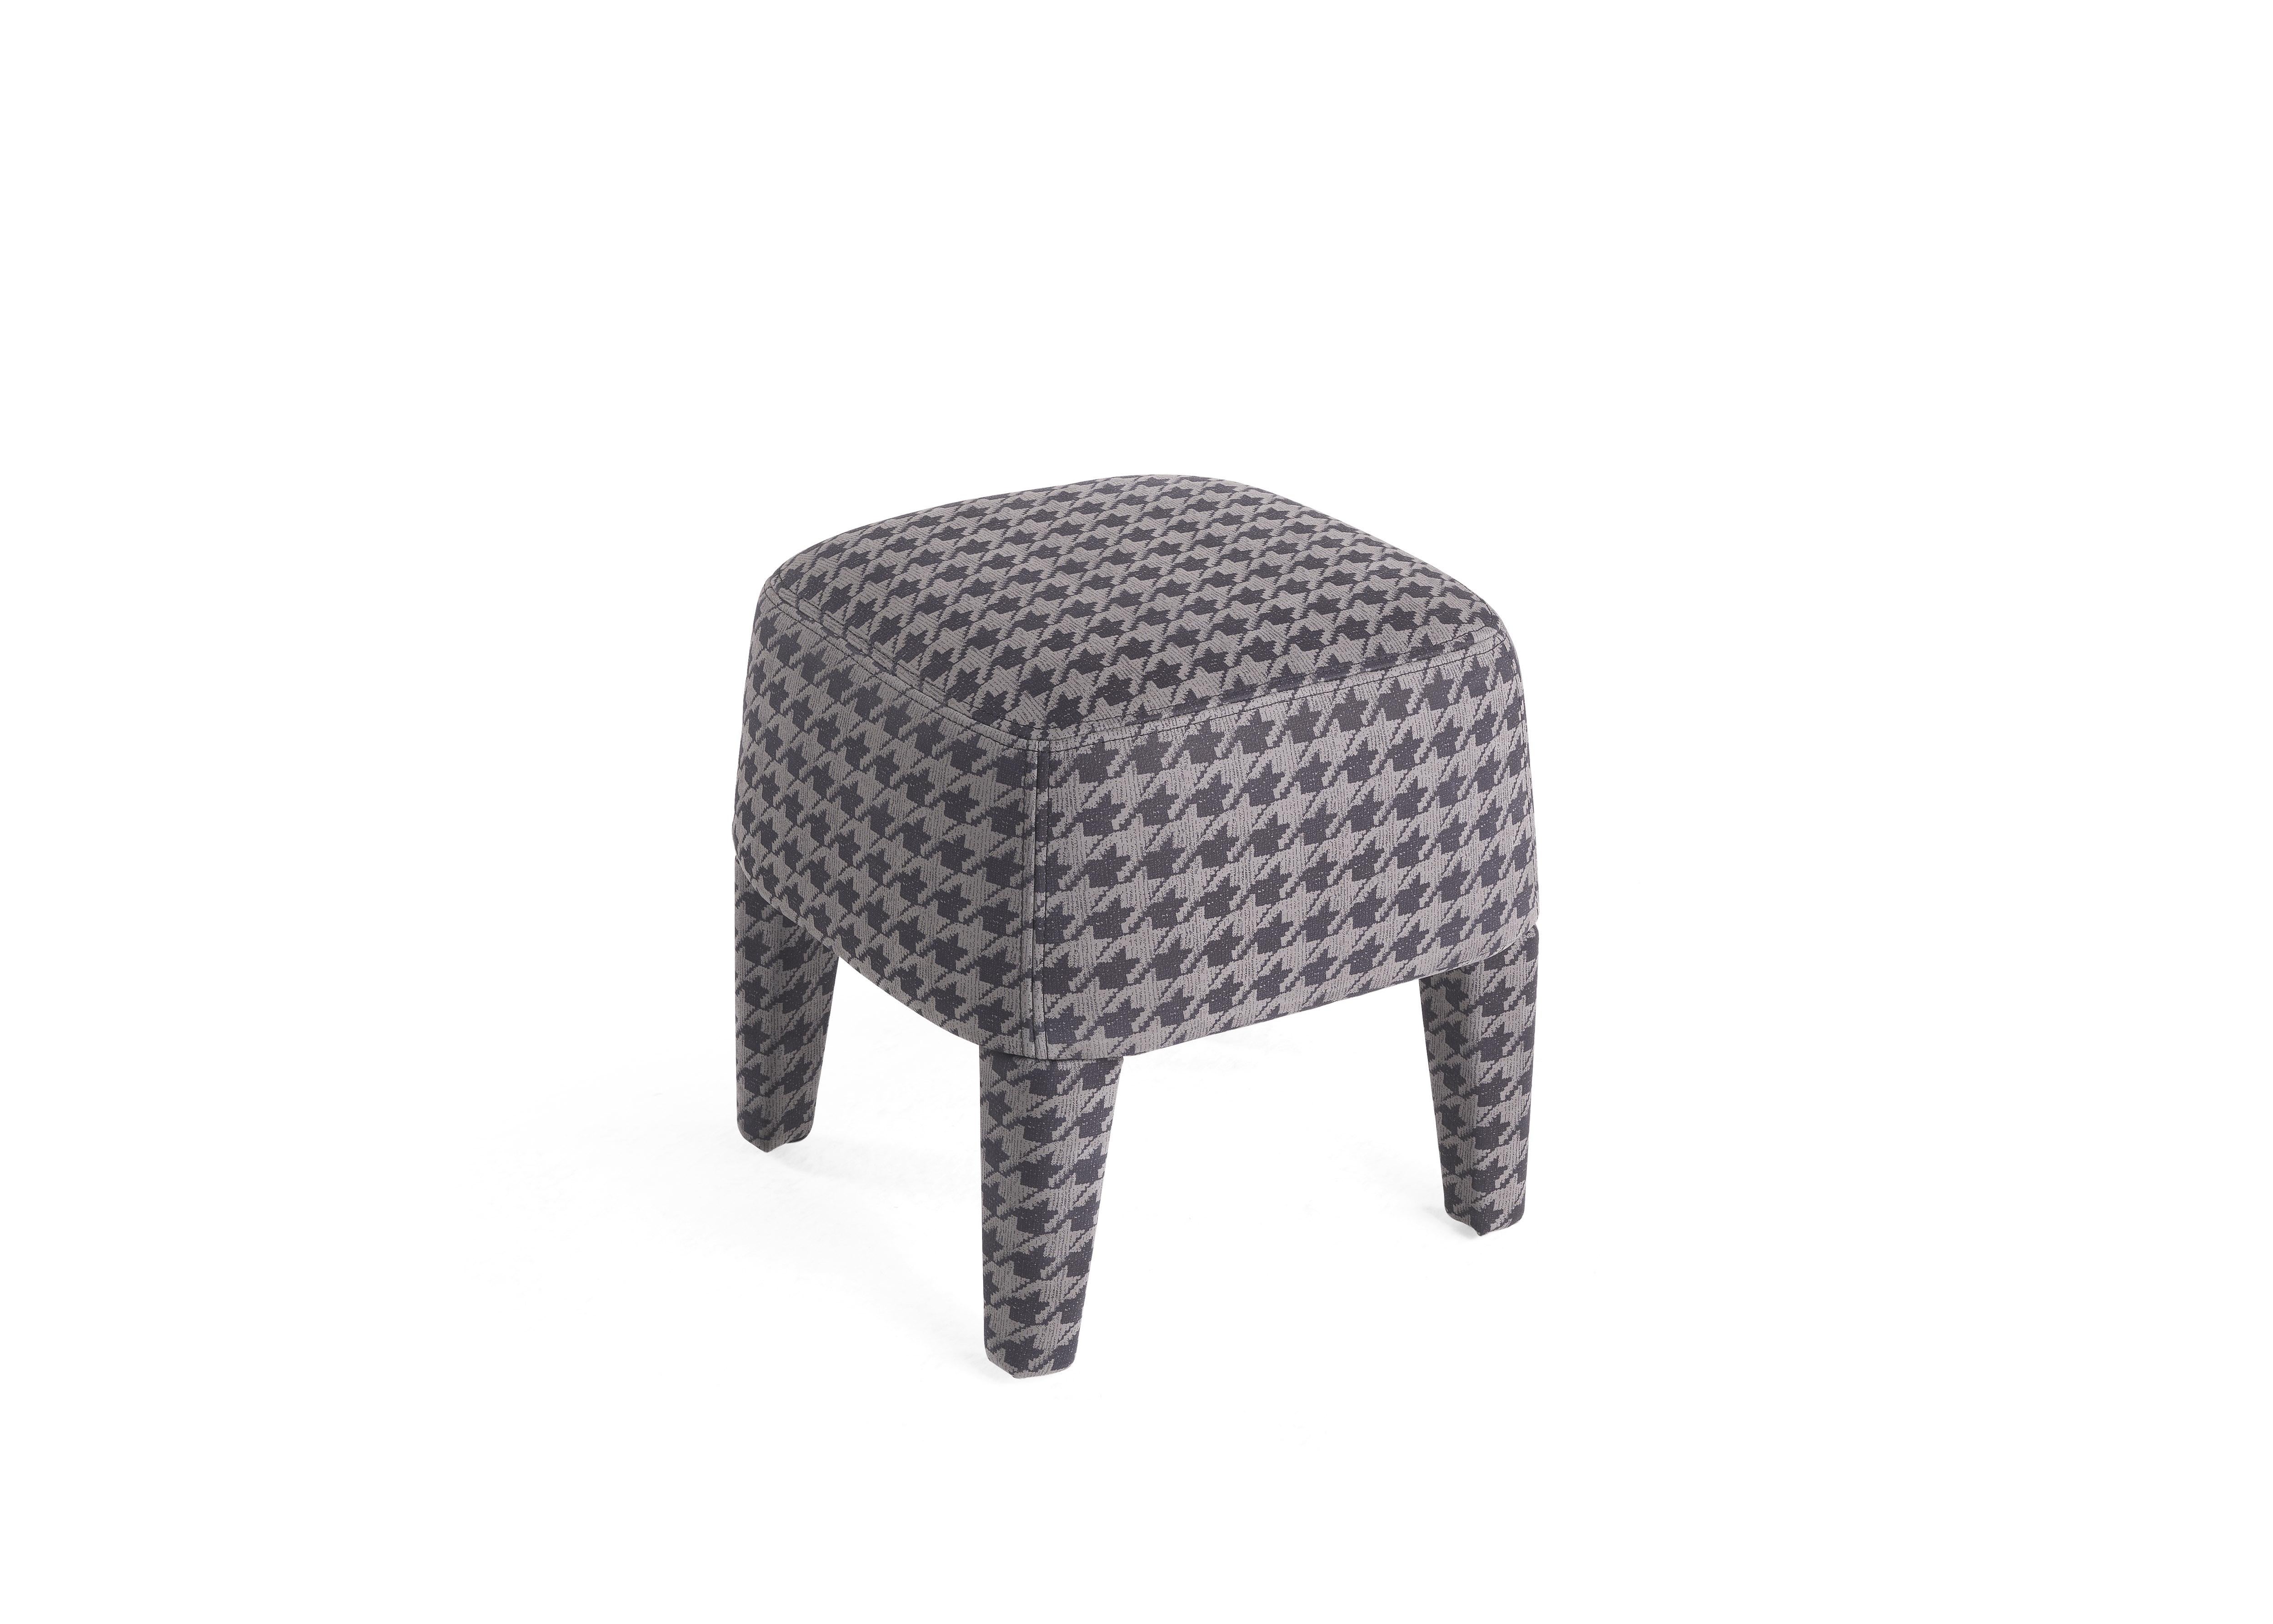 The Mini pouf features a light and versatile design. Small, soft and compact, it adds character to any setting. Available in different menswear fabrics of the collection: pied-de-poule, pinstripe, twill, Prince of Wales.
Mini pouf with the structure